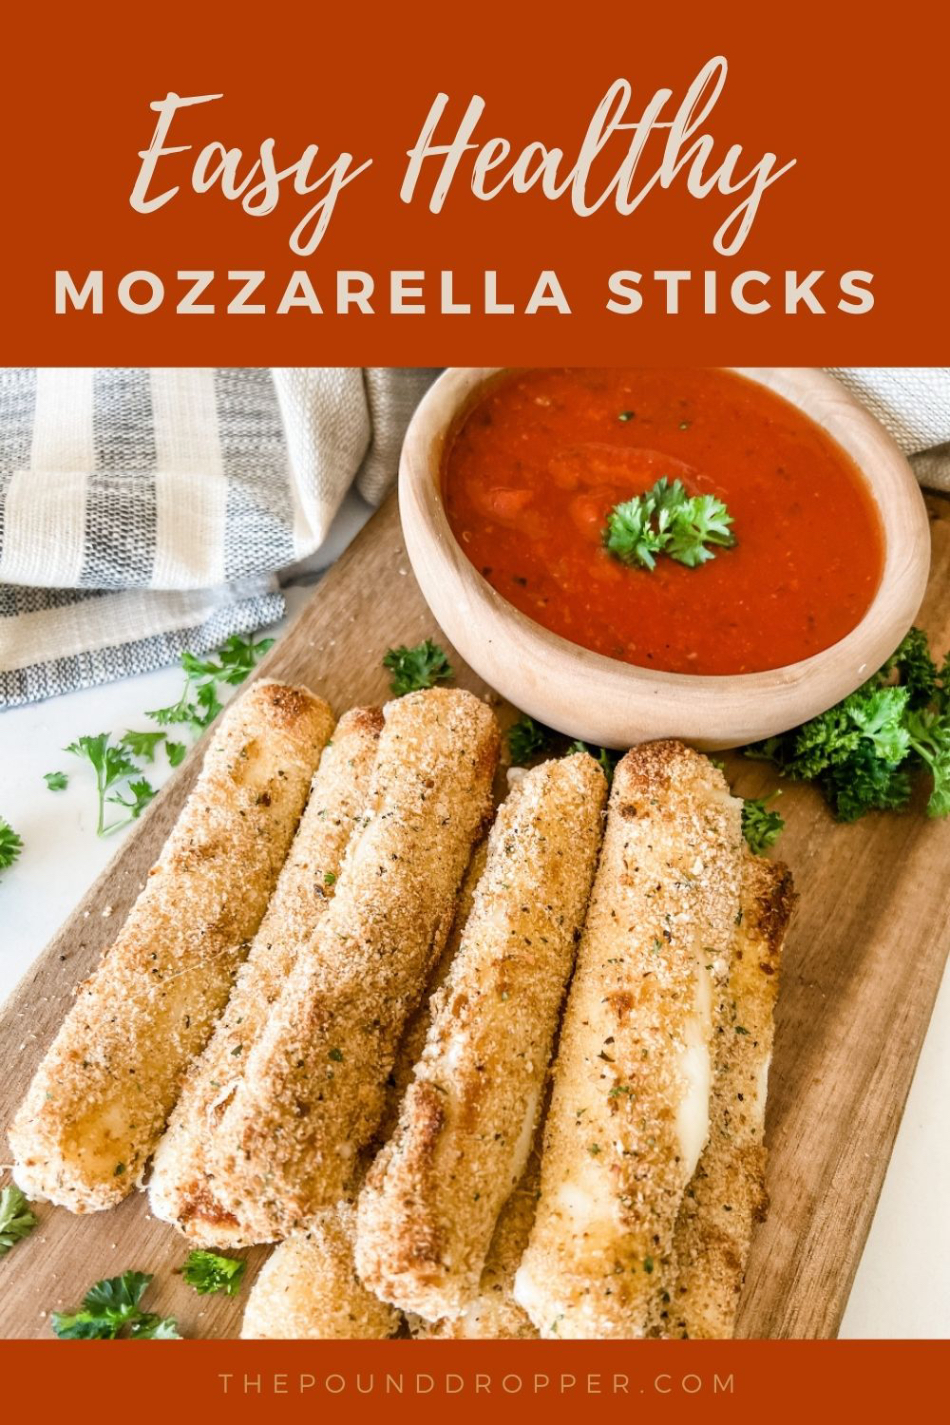 These Easy Healthy Mozzarella Sticks make a delicious game day snack or appetizer!  These are coated in a flour, egg wash, bread crumbs, seasonings, and then air fried or baked to golden perfection! Try dipping them in my homemade zero point marinara sauce! via @pounddropper